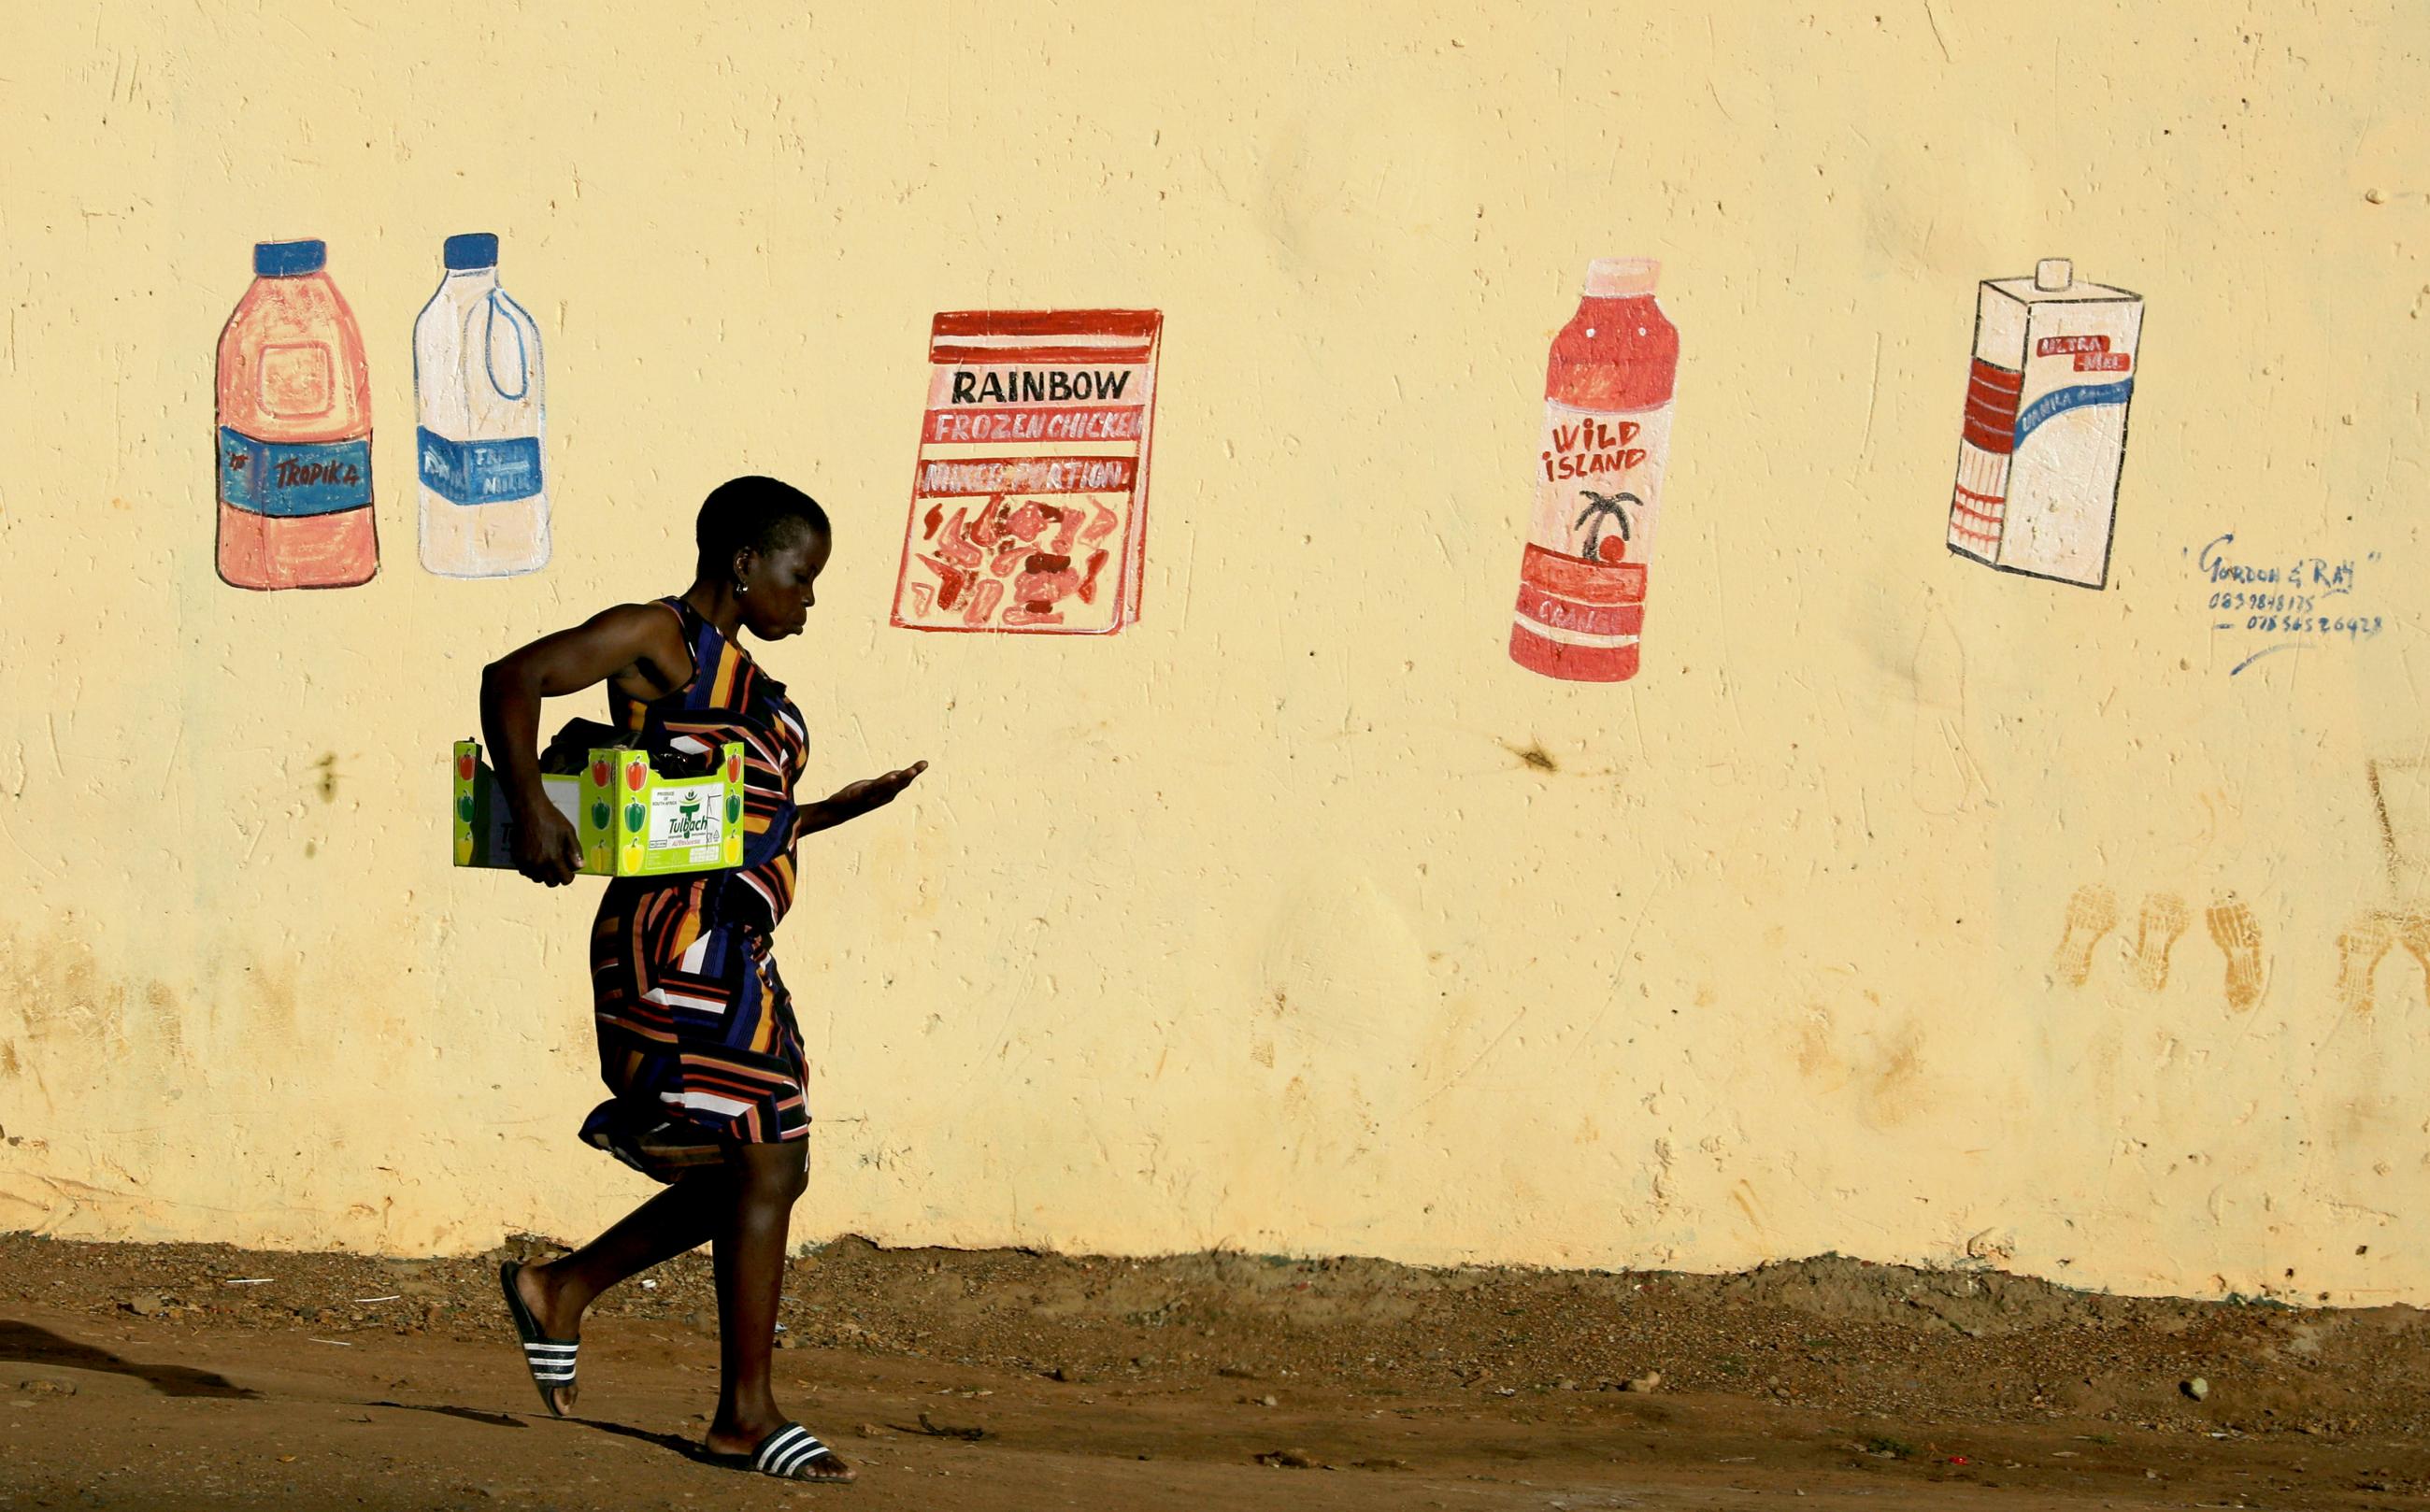 A woman counts her change as she leaves a convenience store, or "spaza shop", with a mural depicting grocery items, during a nationwide lockdown for 21 days to try to contain the coronavirus disease (COVID-19) outbreak, at the Elias Motsoaledi informal settlement, South Africa, April 7, 2020. 